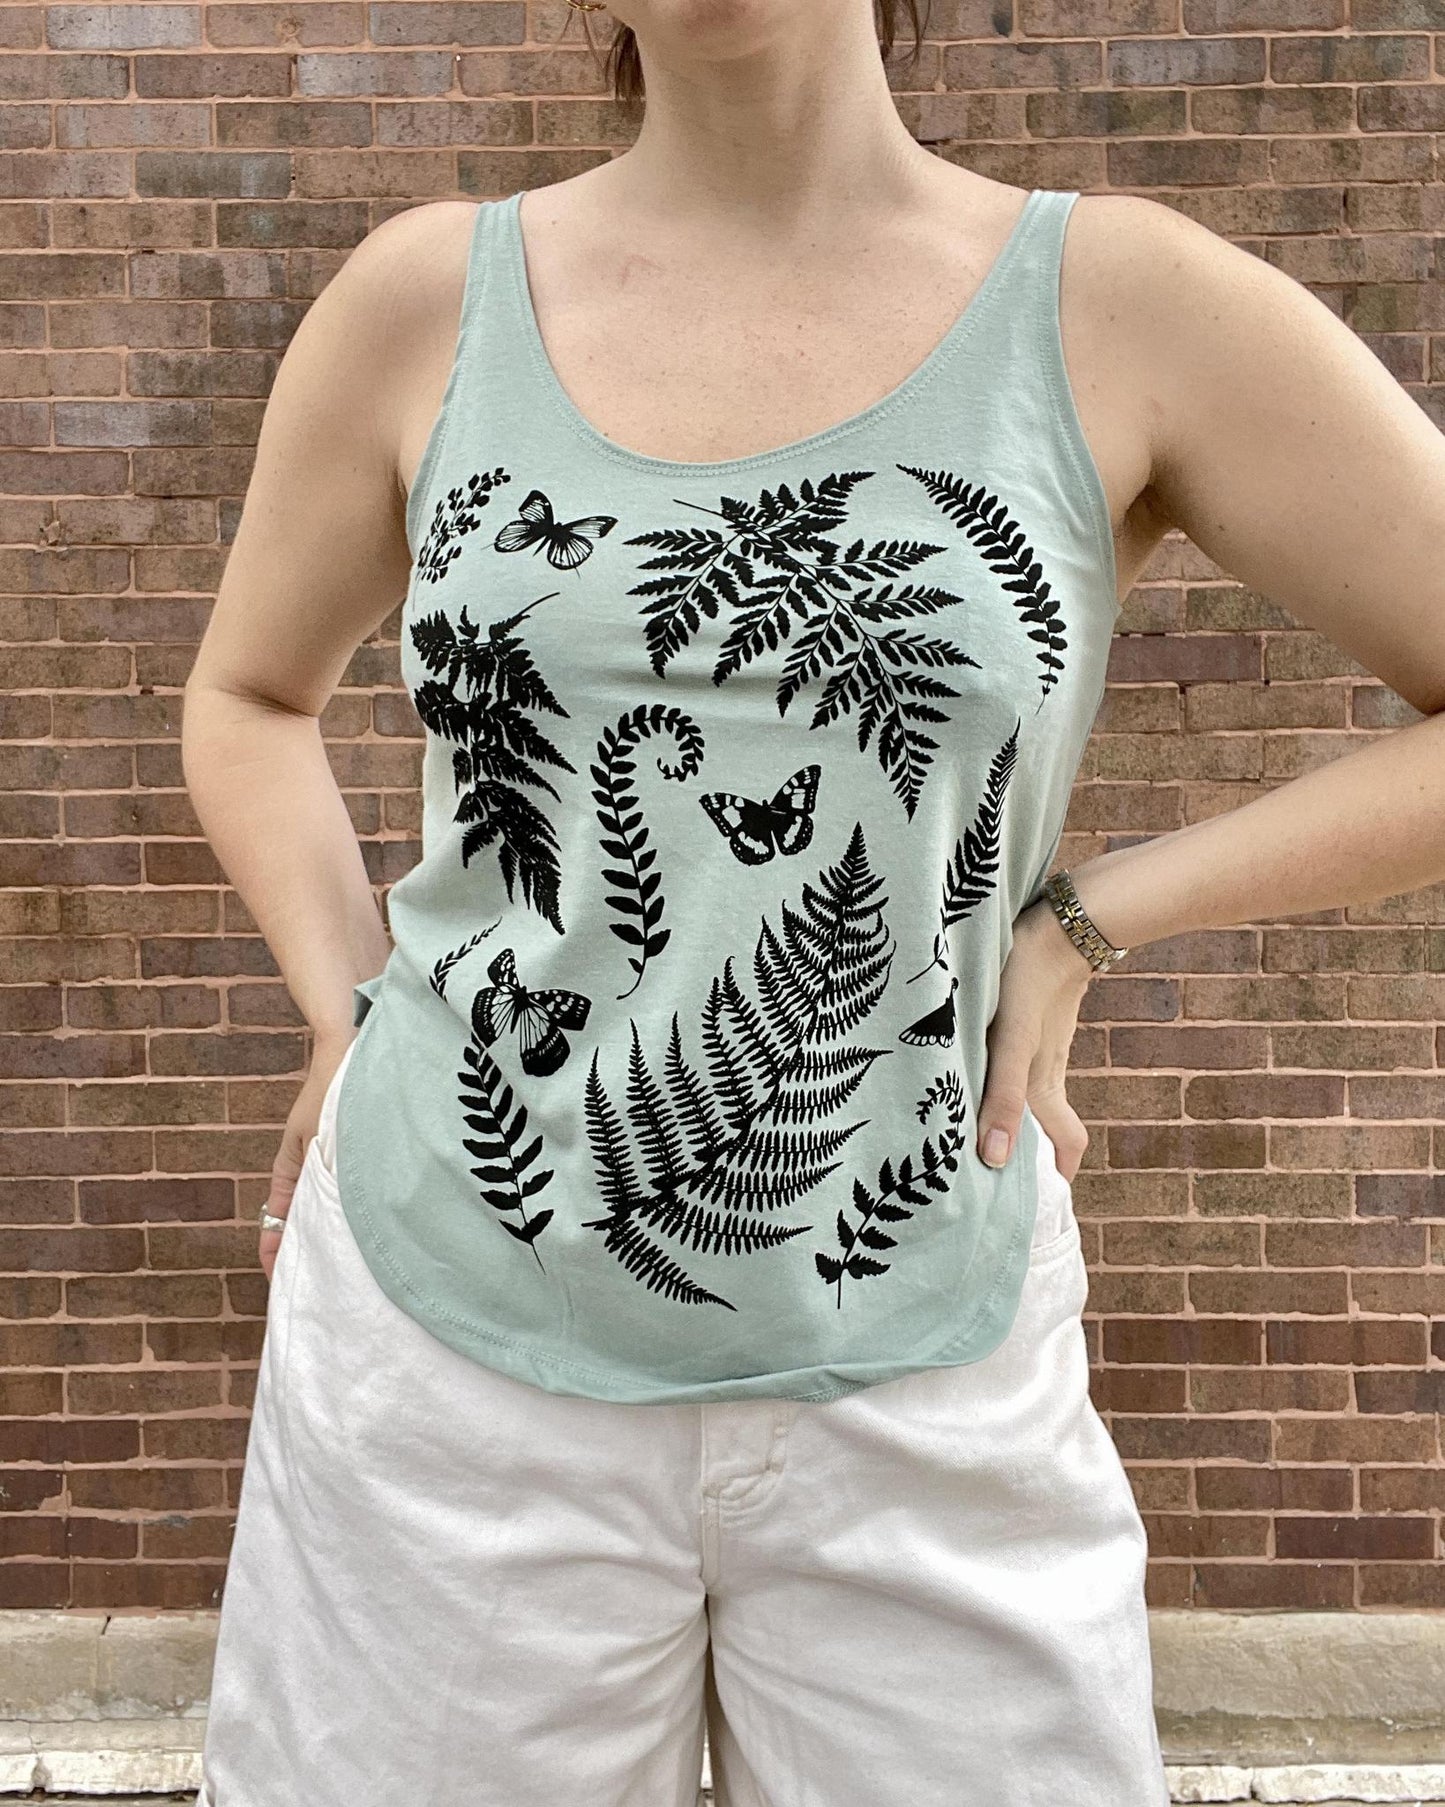 Mad Love Seafoam Tank with Butterflies and Ferns